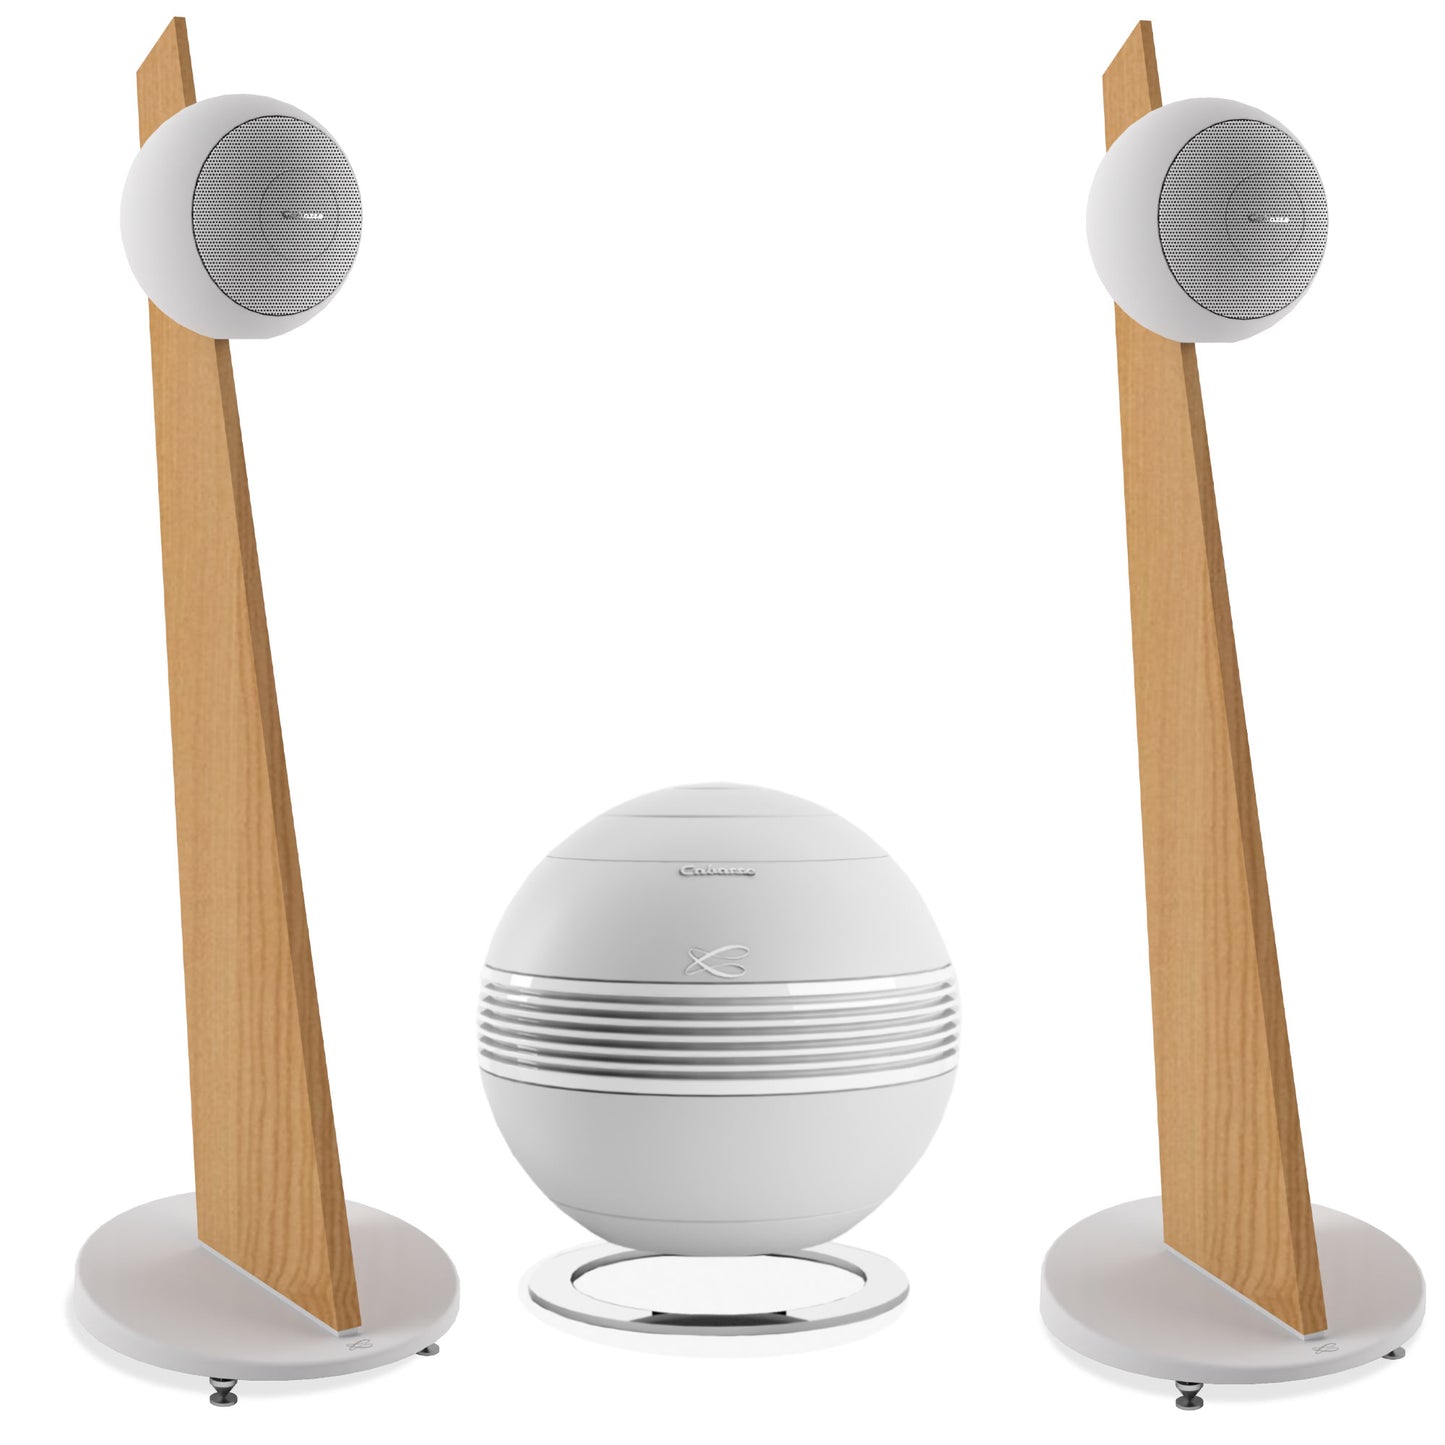 Cabasse Baltic 5 + Pearl Sub Bundle - White speakers on oak stands with white subwoofer